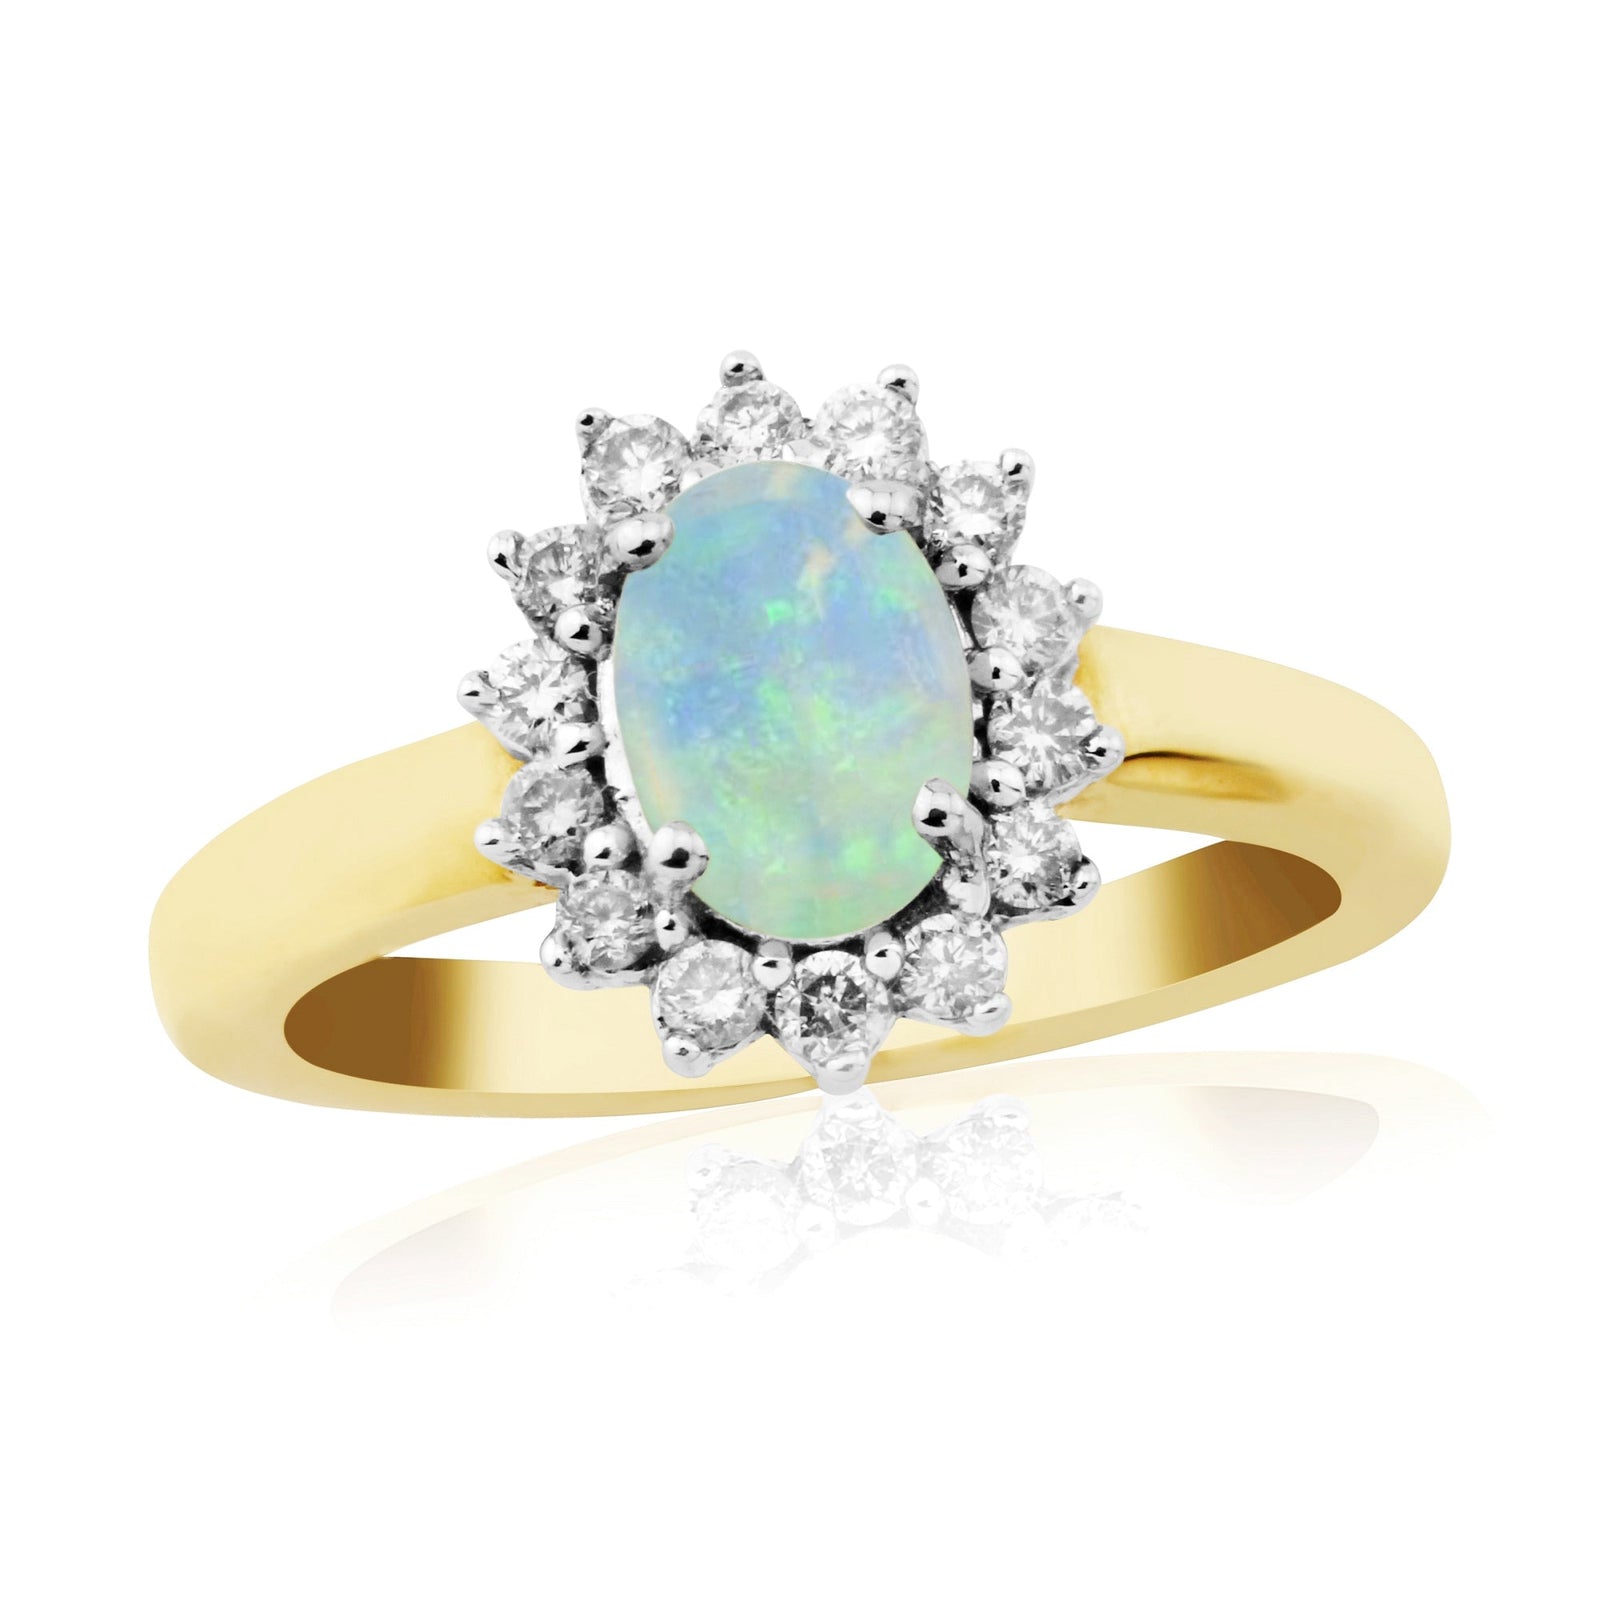 9ct gold 7x5mm oval opal & diamond cluster ring 0.25ct